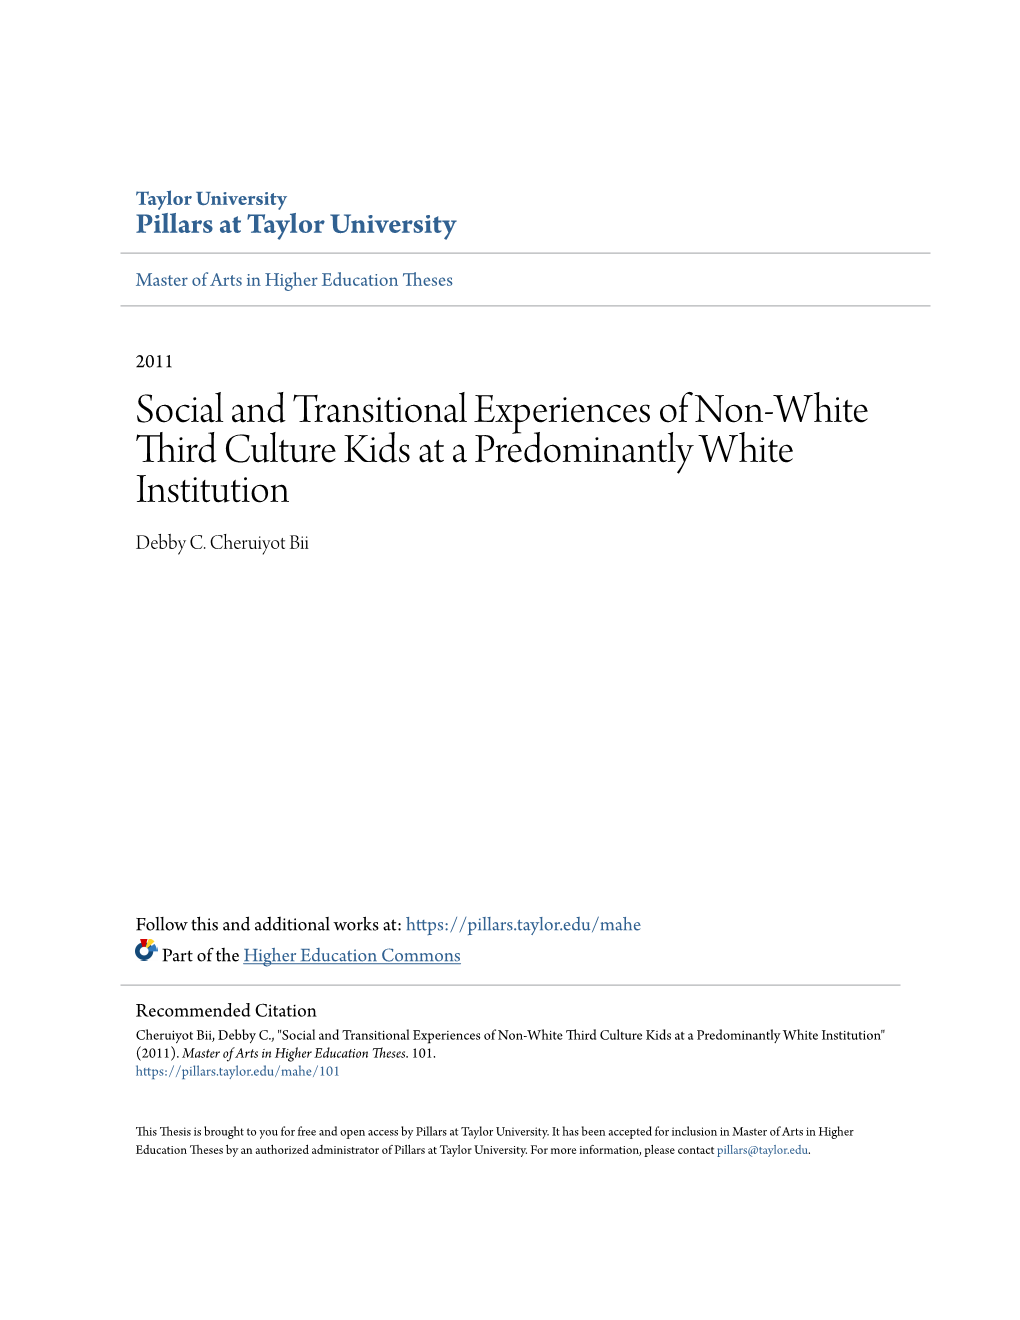 Social and Transitional Experiences of Non-White Third Culture Kids at a Predominantly White Institution Debby C